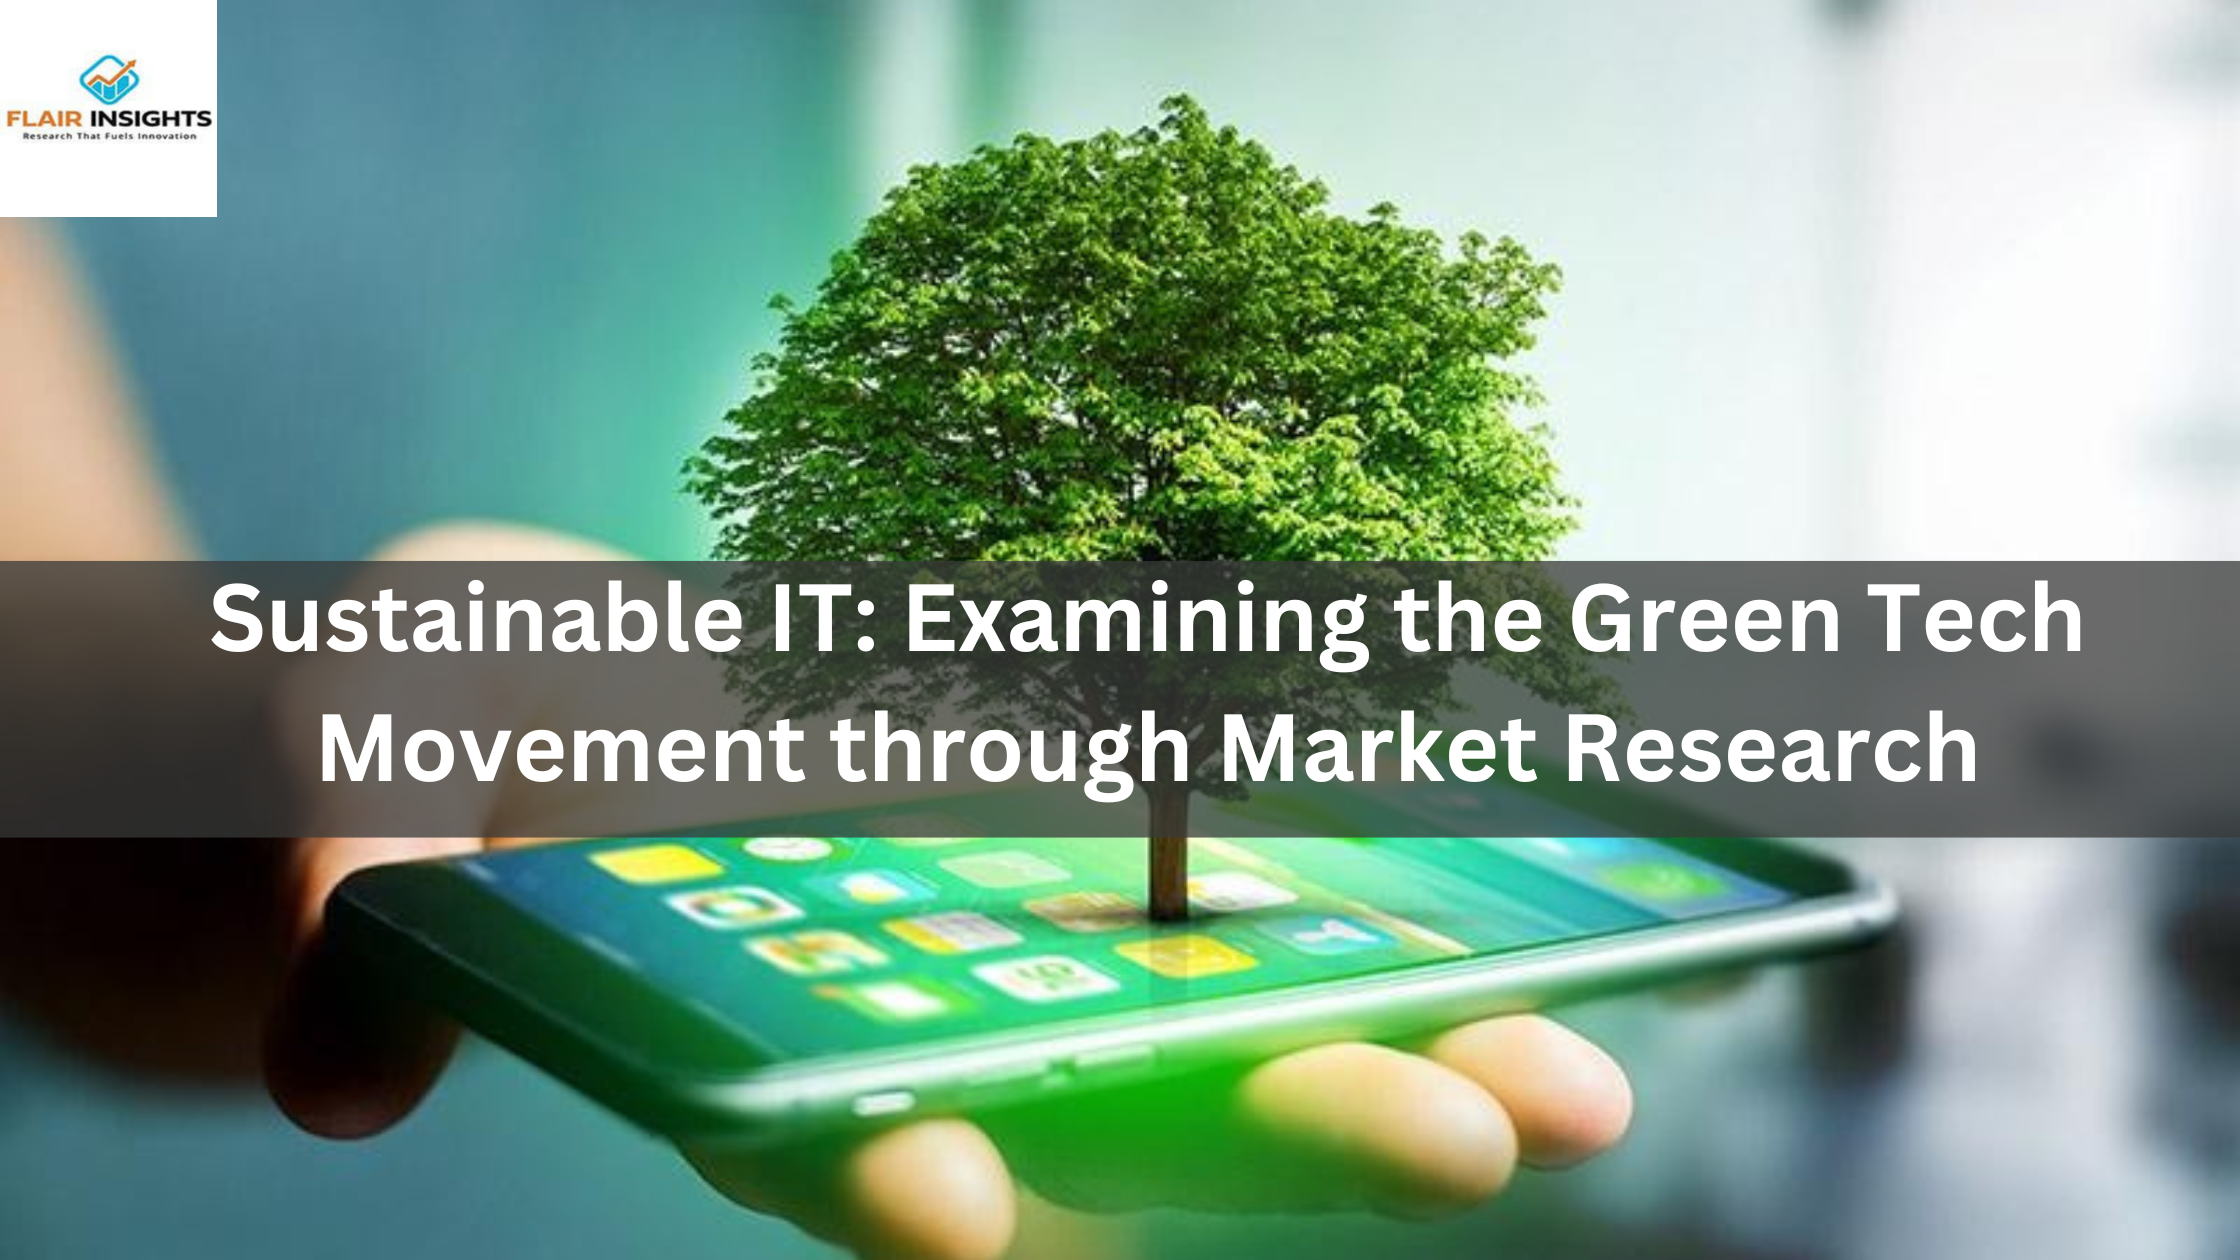 Sustainable IT: Examining the Green Tech Movement through Market Research